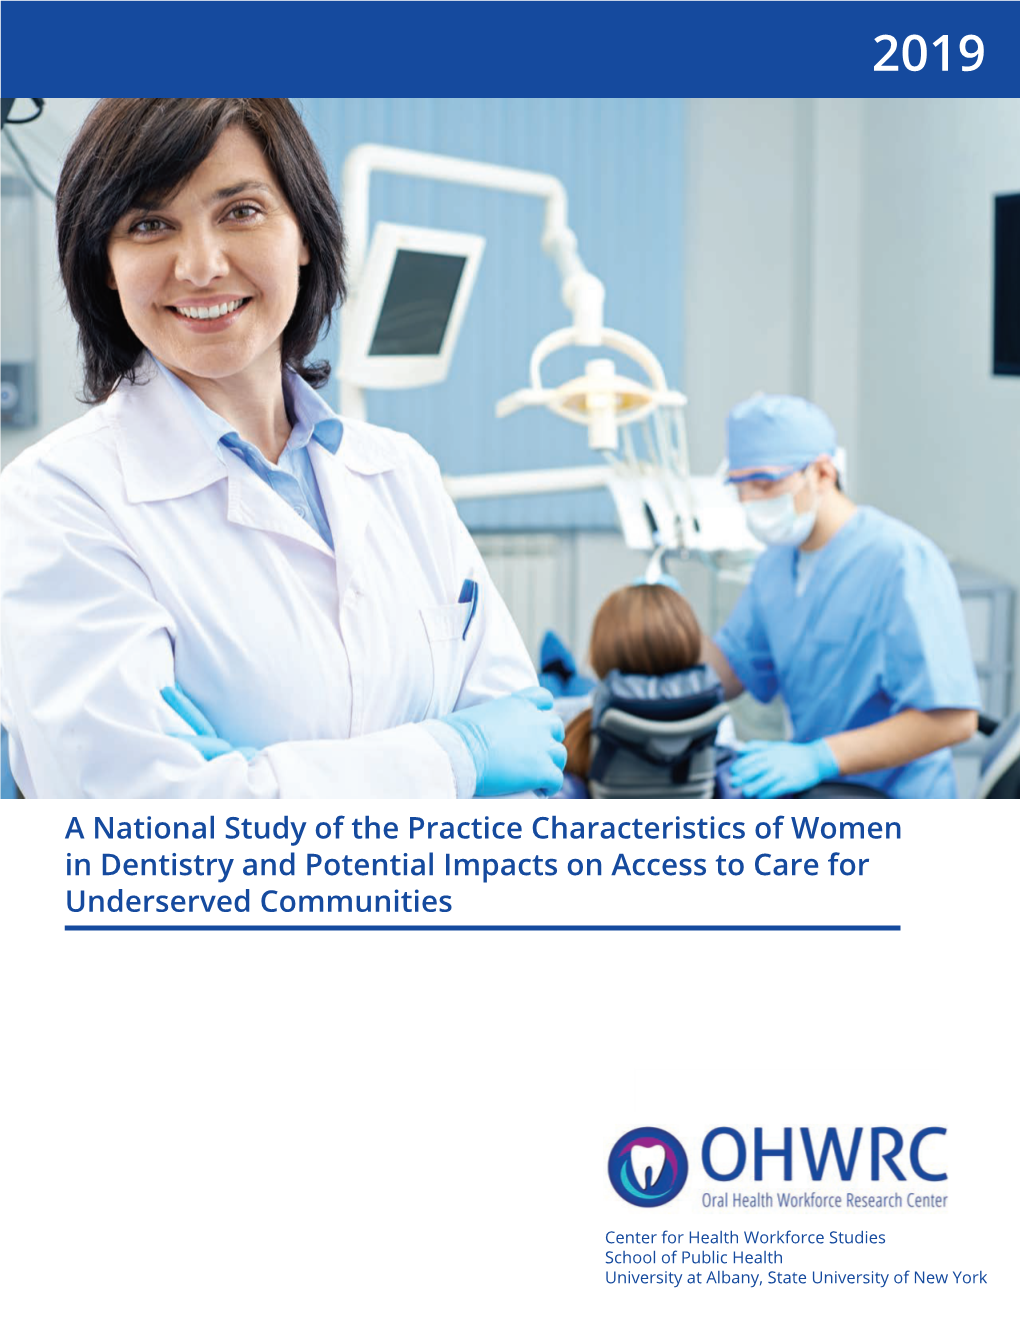 A National Study of the Practice Characteristics of Women in Dentistry and Potential Impacts on Access to Care for Underserved Communities